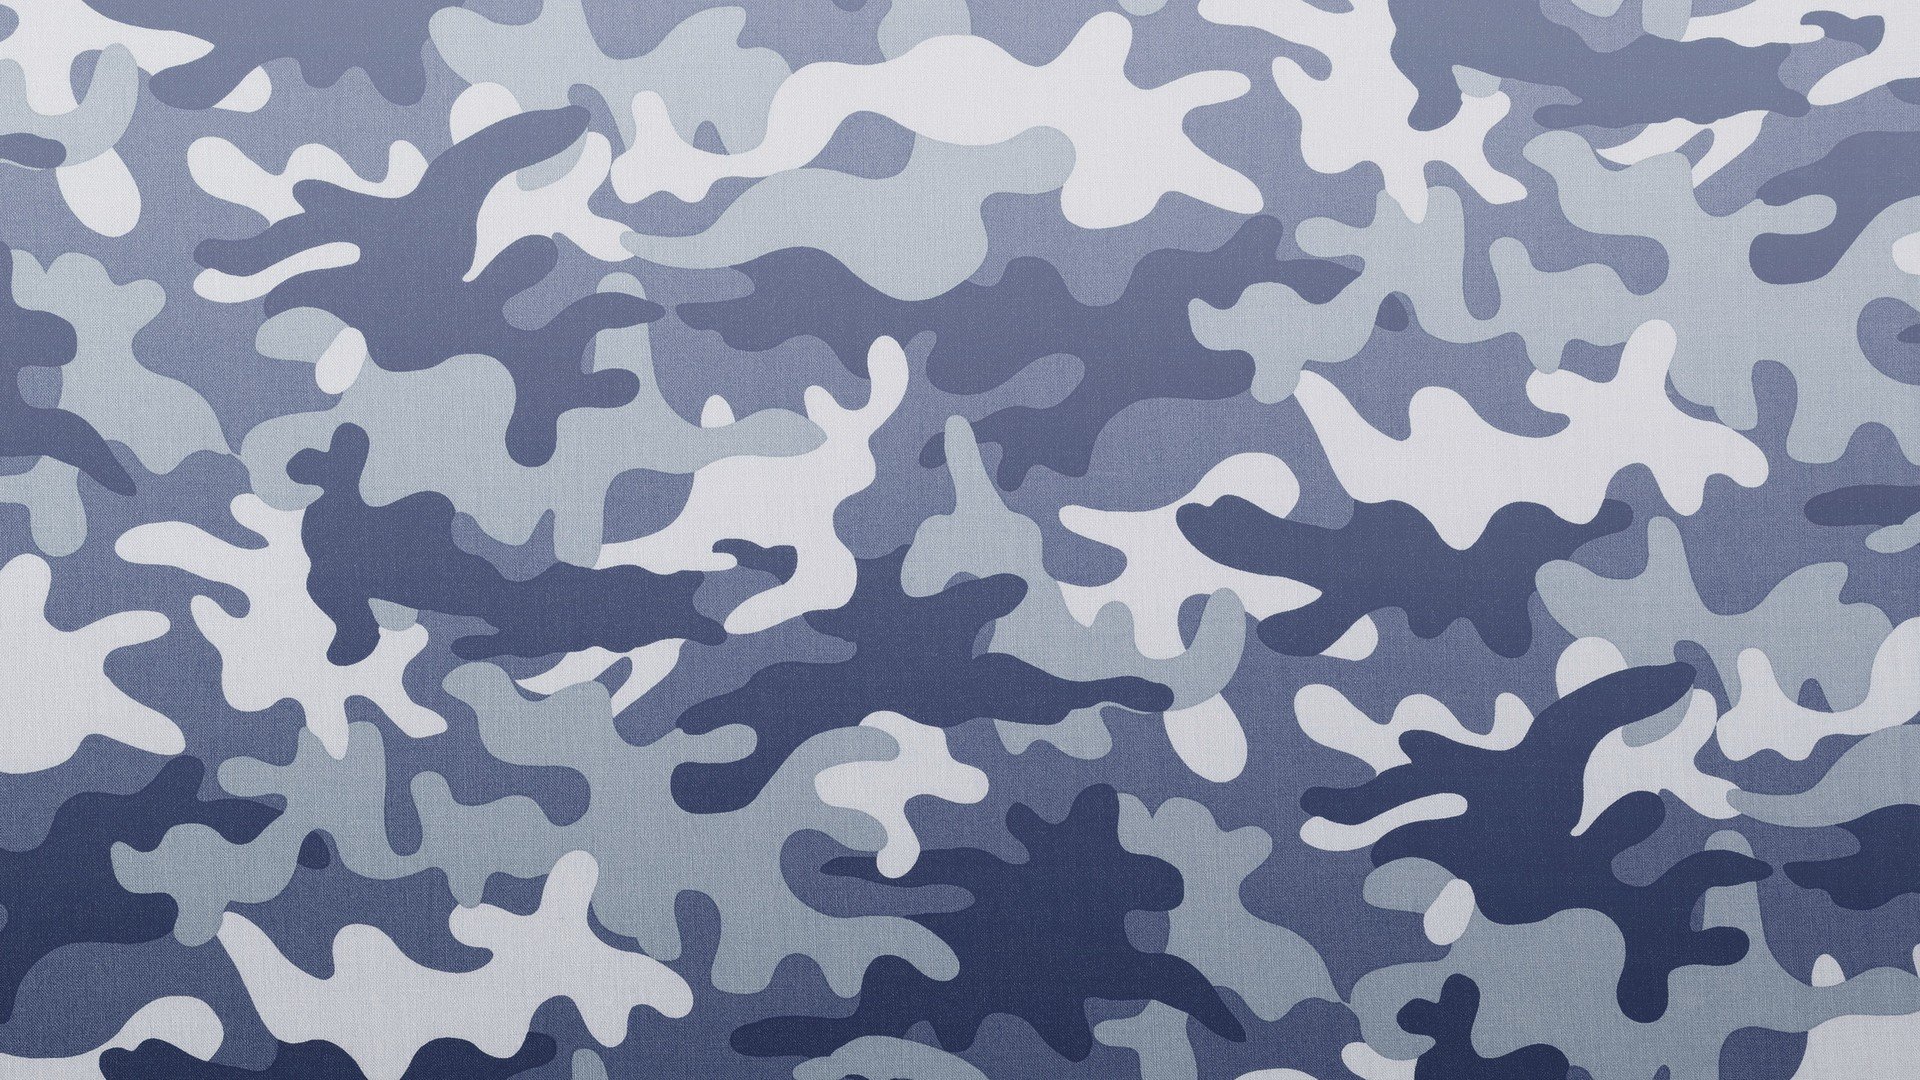 minimalistic, Army, Patterns, Vectors, Templates, Camouflage, Moro